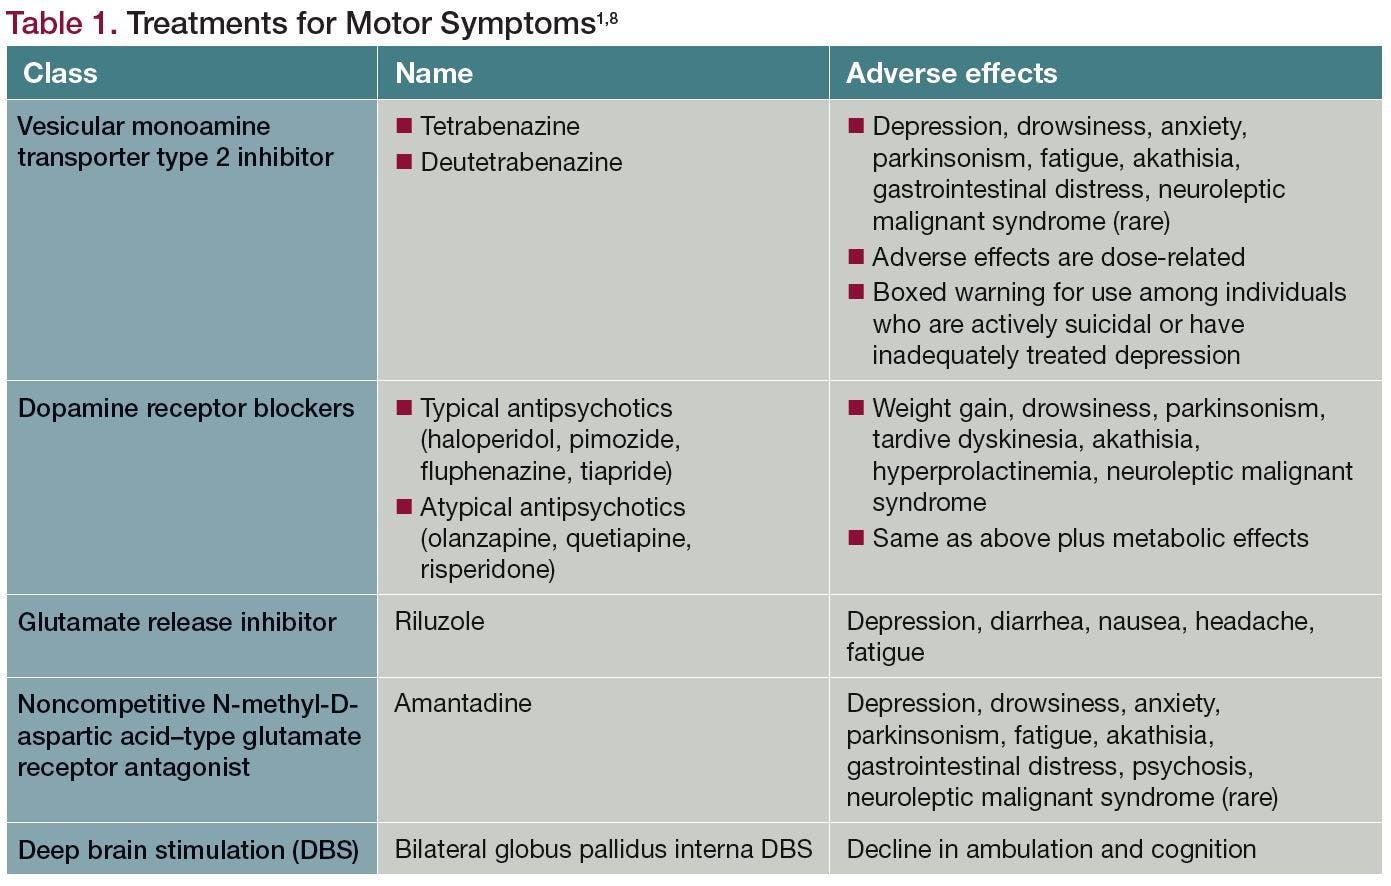 Table 1. Treatments for Motor Symptoms1,8